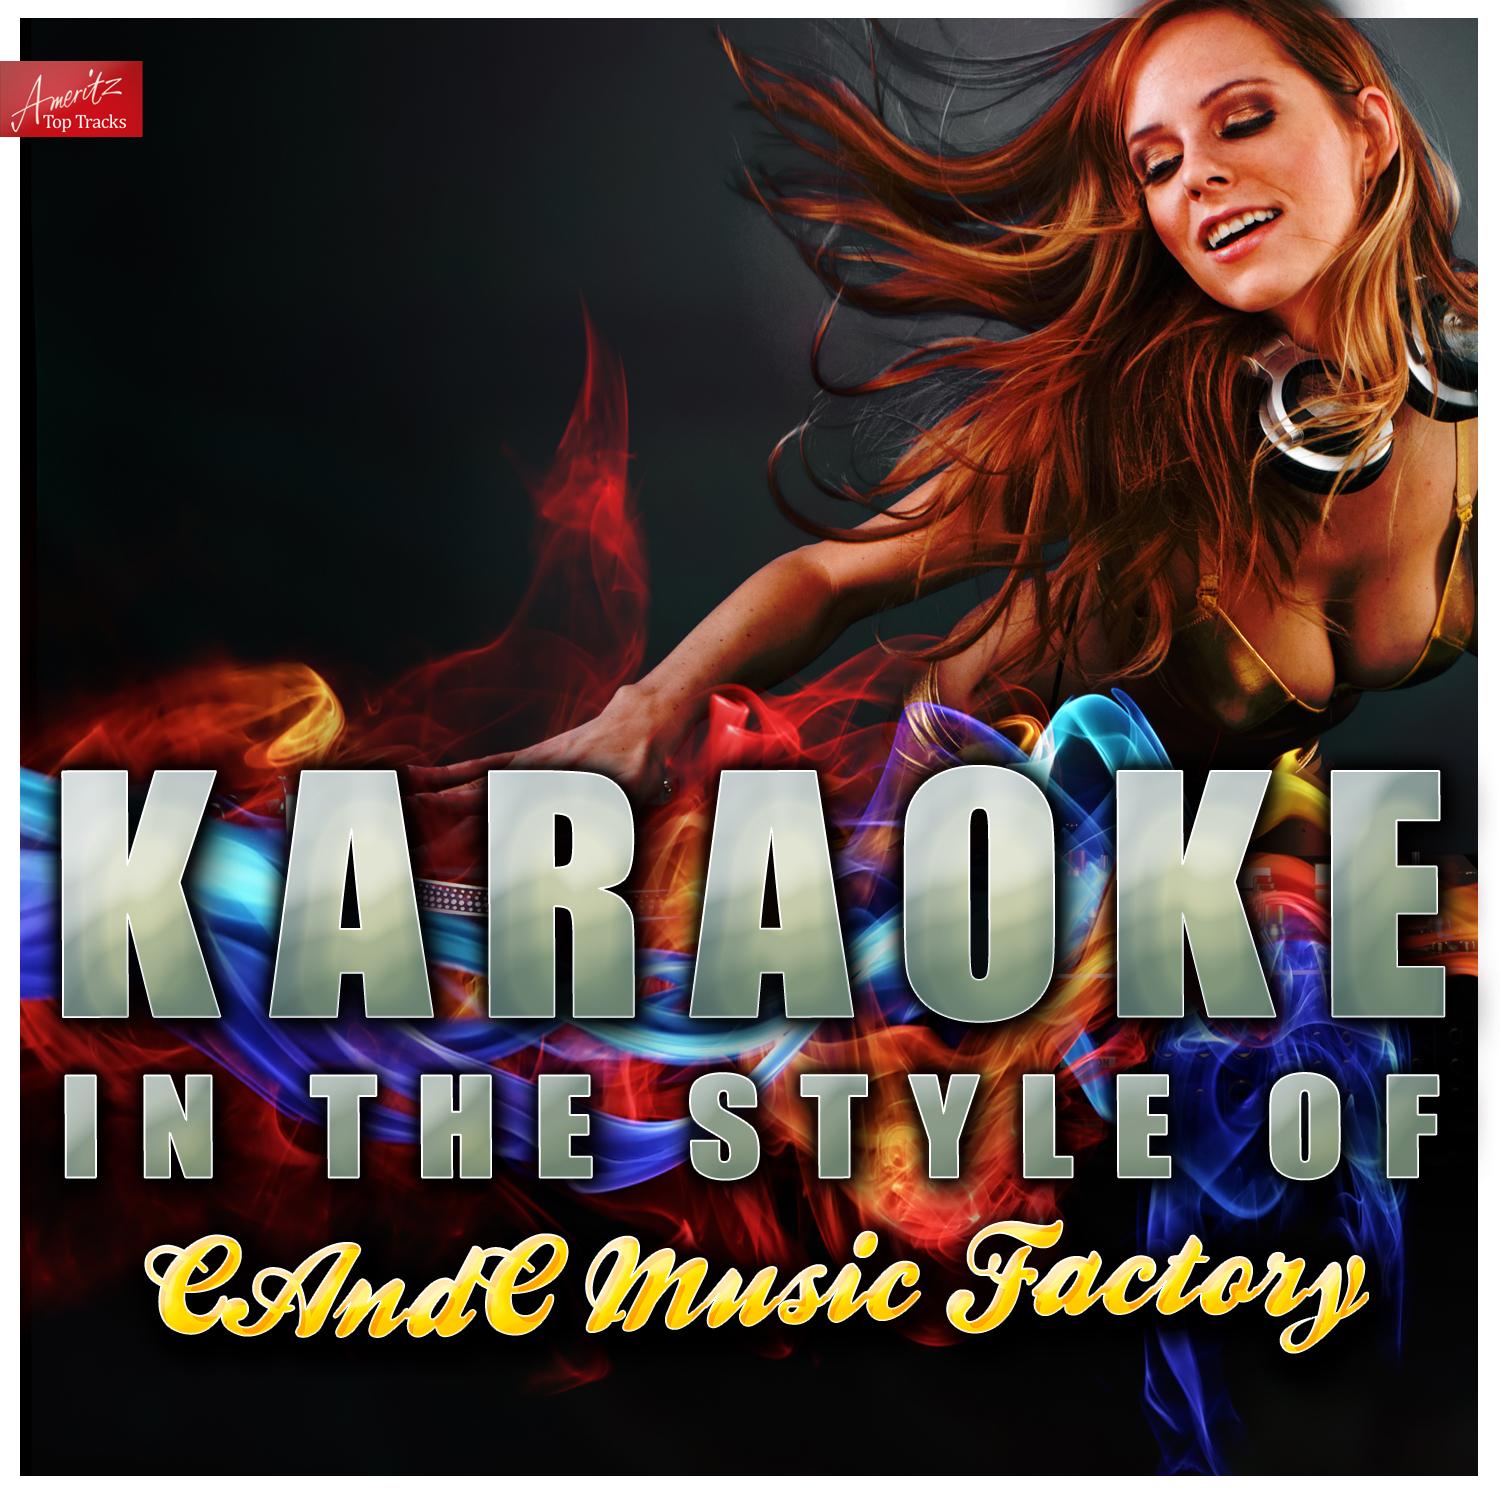 Gonna Make You Sweat (In the Style of Candc Music Factory) [Karaoke Version]